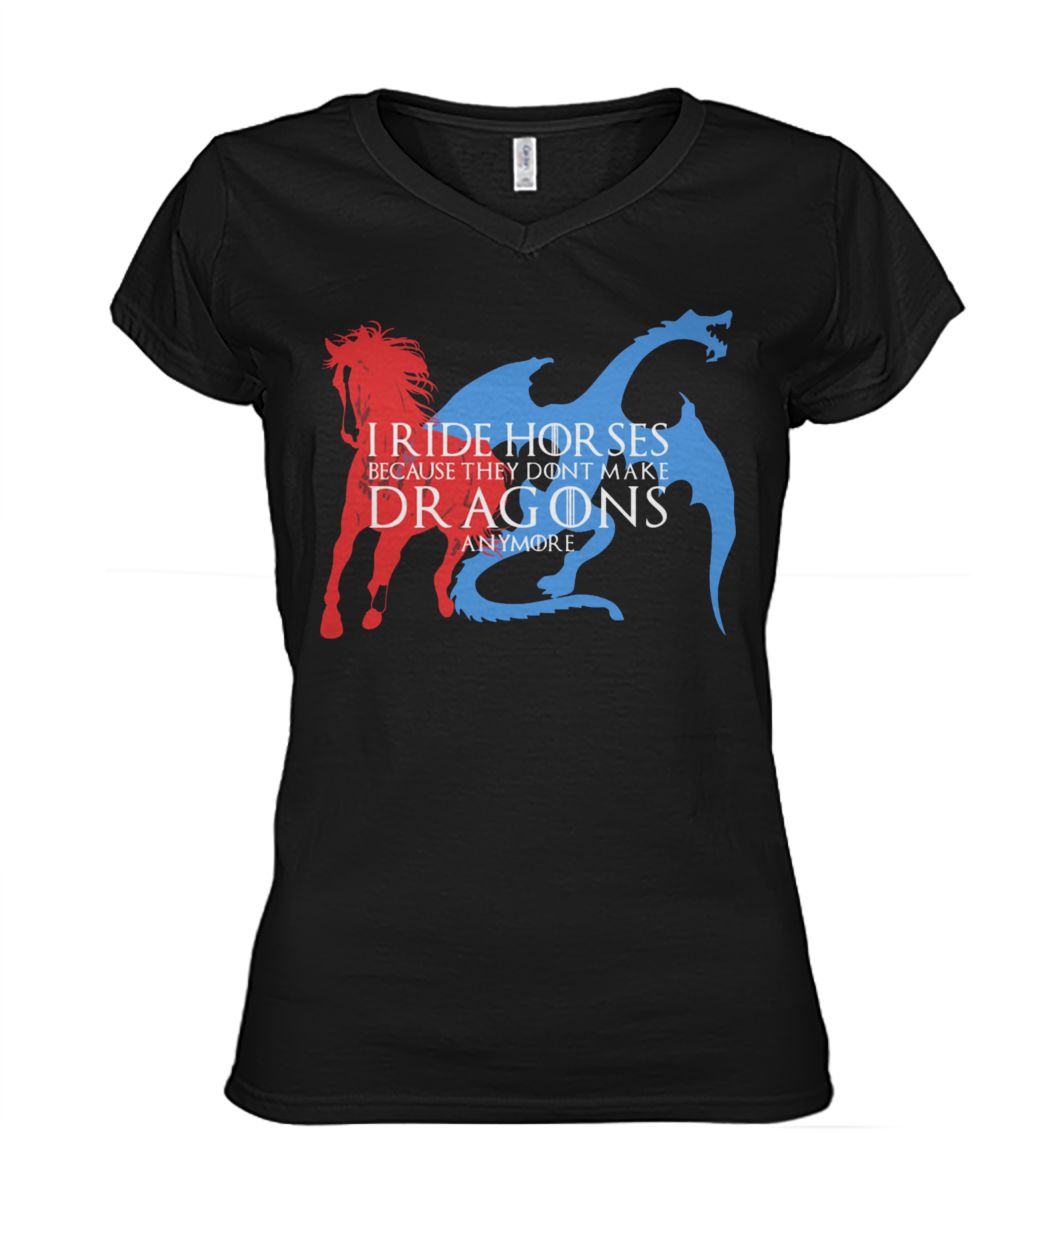 I ride hor ses because they dont make dragons anymore game of thrones women's v-neck